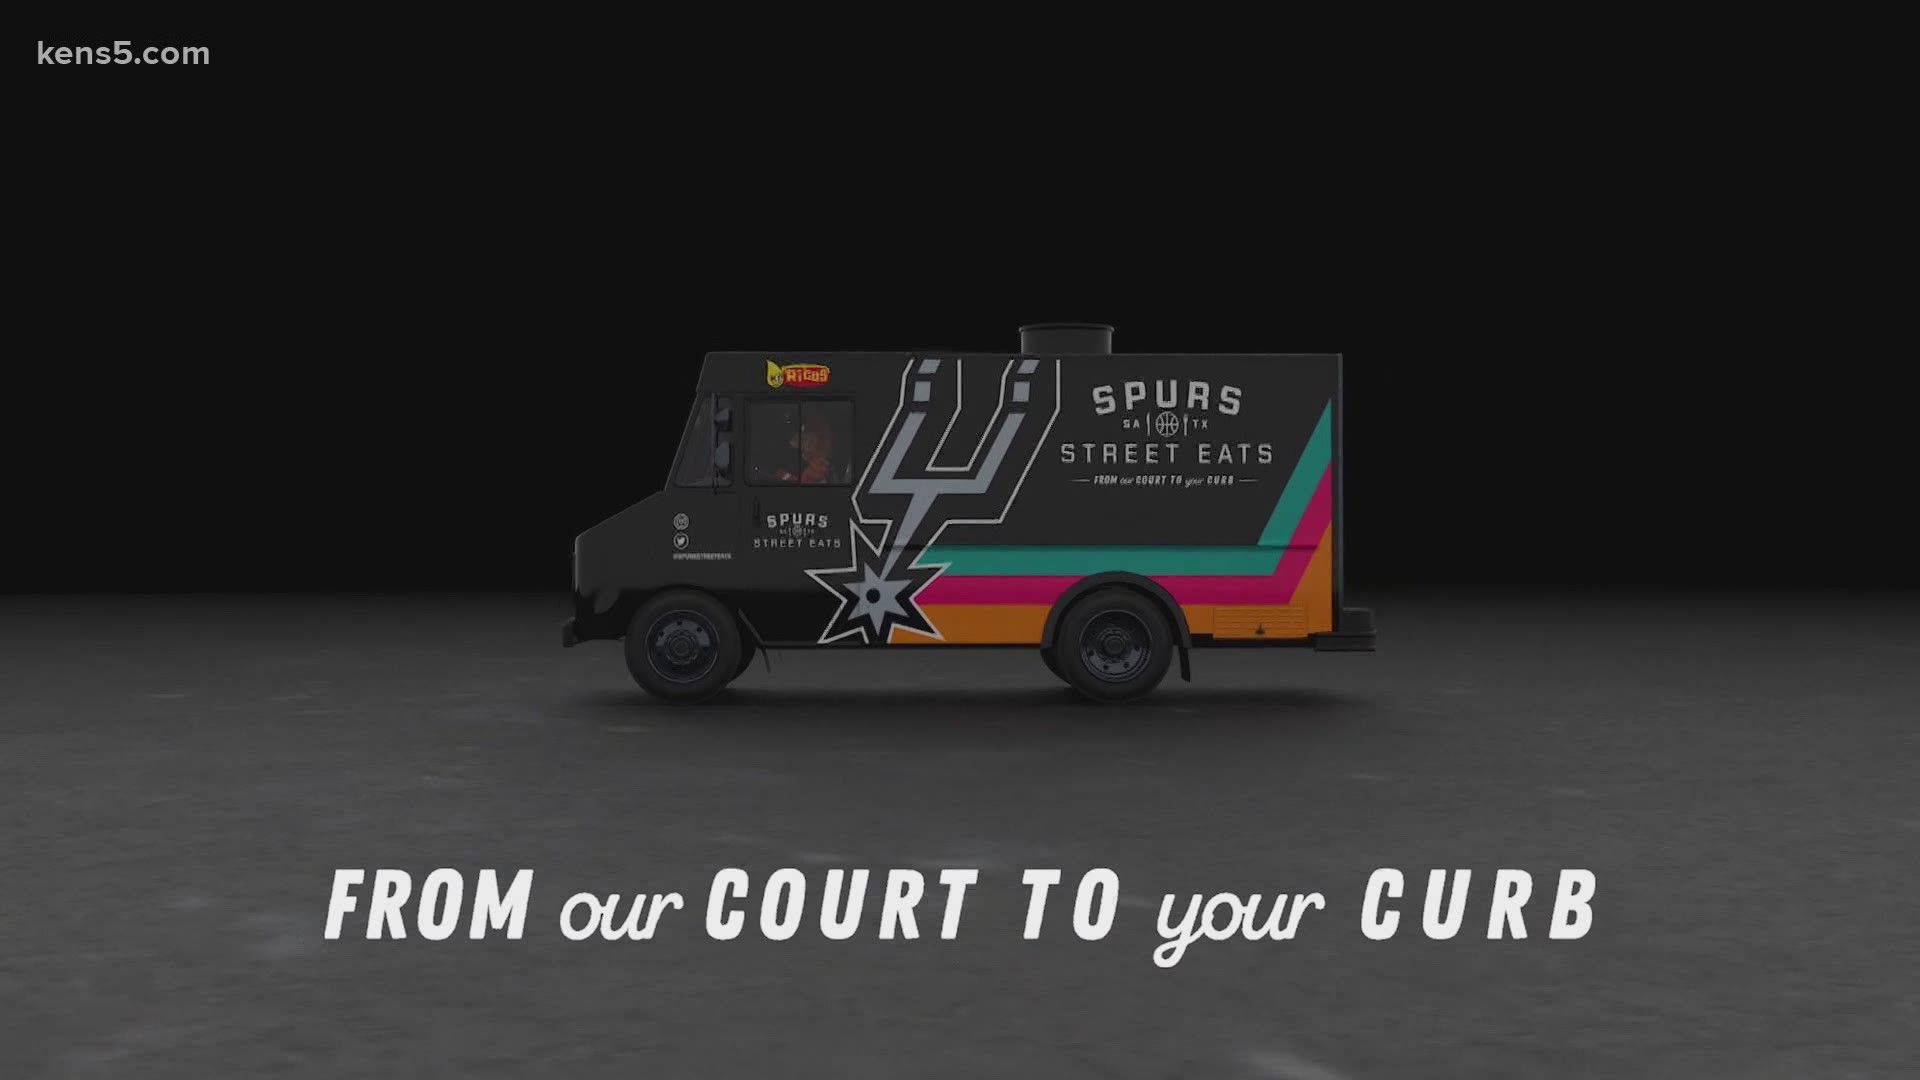 Spurs Street Eats Food Truck will celebrate its grand opening with an event featuring The Coyote. Digital Journalist Megan Ball shares more on what to expect.